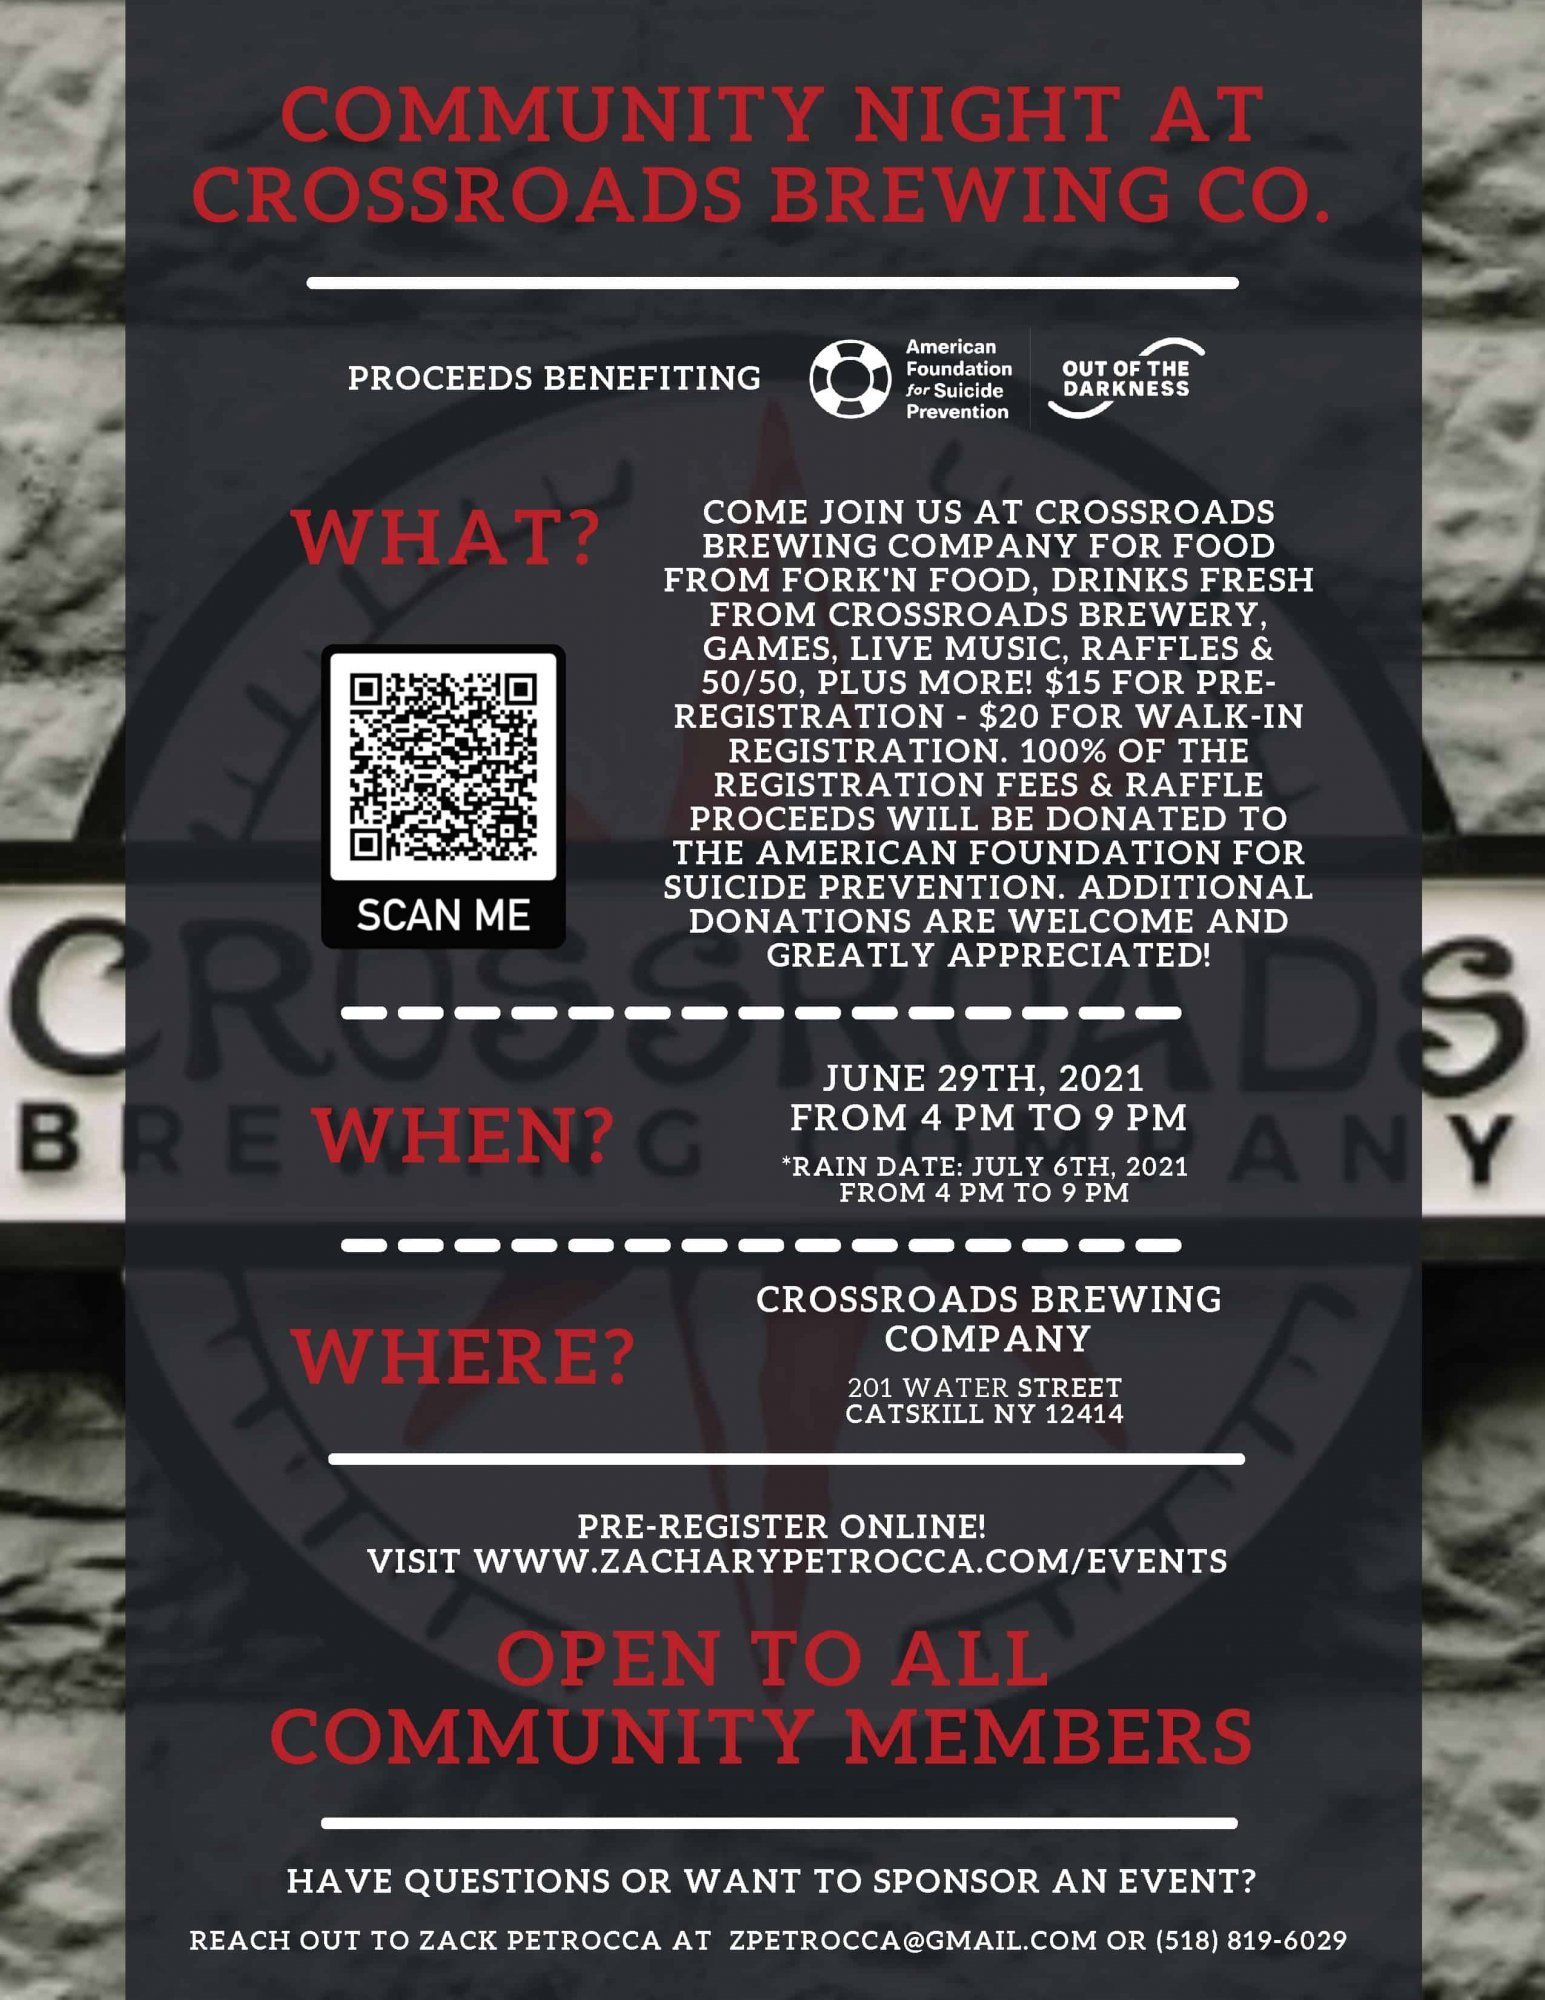 image of flyer for event. Community Night At Crossroads Brewing Company. Proceeds benefiting the Ameican Foundation For Suicide Prevention. COME JOIN US AT CROSSROADS BREWING COMPANY FOR FOOD FROM FORK'N FOOD, DRINKS FRESH FROM CROSSROADS BREWERY, GAMES, LIVE MUSIC, RAFFLES & 50/50, PLUS MORE! $15 FOR PRE-REGISTRATION - $20 FOR WALK-IN REGISTRATION. 100% OF THE REGISTRATION FEES & RAFFLE PROCEEDS WILL BE DONATED TO THE AMERICAN FOUNDATION FOR SUICIDE PREVENTION. ADDITIONAL DONATIONS ARE WELCOME AND GREATLY APPRECIATED! JUNE 29TH, 2021 FROM 4 PM TO 9 PM *RAIN DATE: JULY 6TH, 2021
FROM 4 PM TO 9 PM. CROSSROADS BREWING COMPANY
201 WATER STREET CATSKILL NY 12414. PRE-REGISTER ONLINE! 
VISIT WWW.ZACHARYPETROCCA.COM/EVENTS. OPEN TO ALL COMMUNITY MEMBERS. HAVE QUESTIONS OR WANT TO SPONSOR AN EVENT? 
REACH OUT TO ZACK PETROCCA AT  ZPETROCCA@GMAIL.COM OR (518) 819-6029